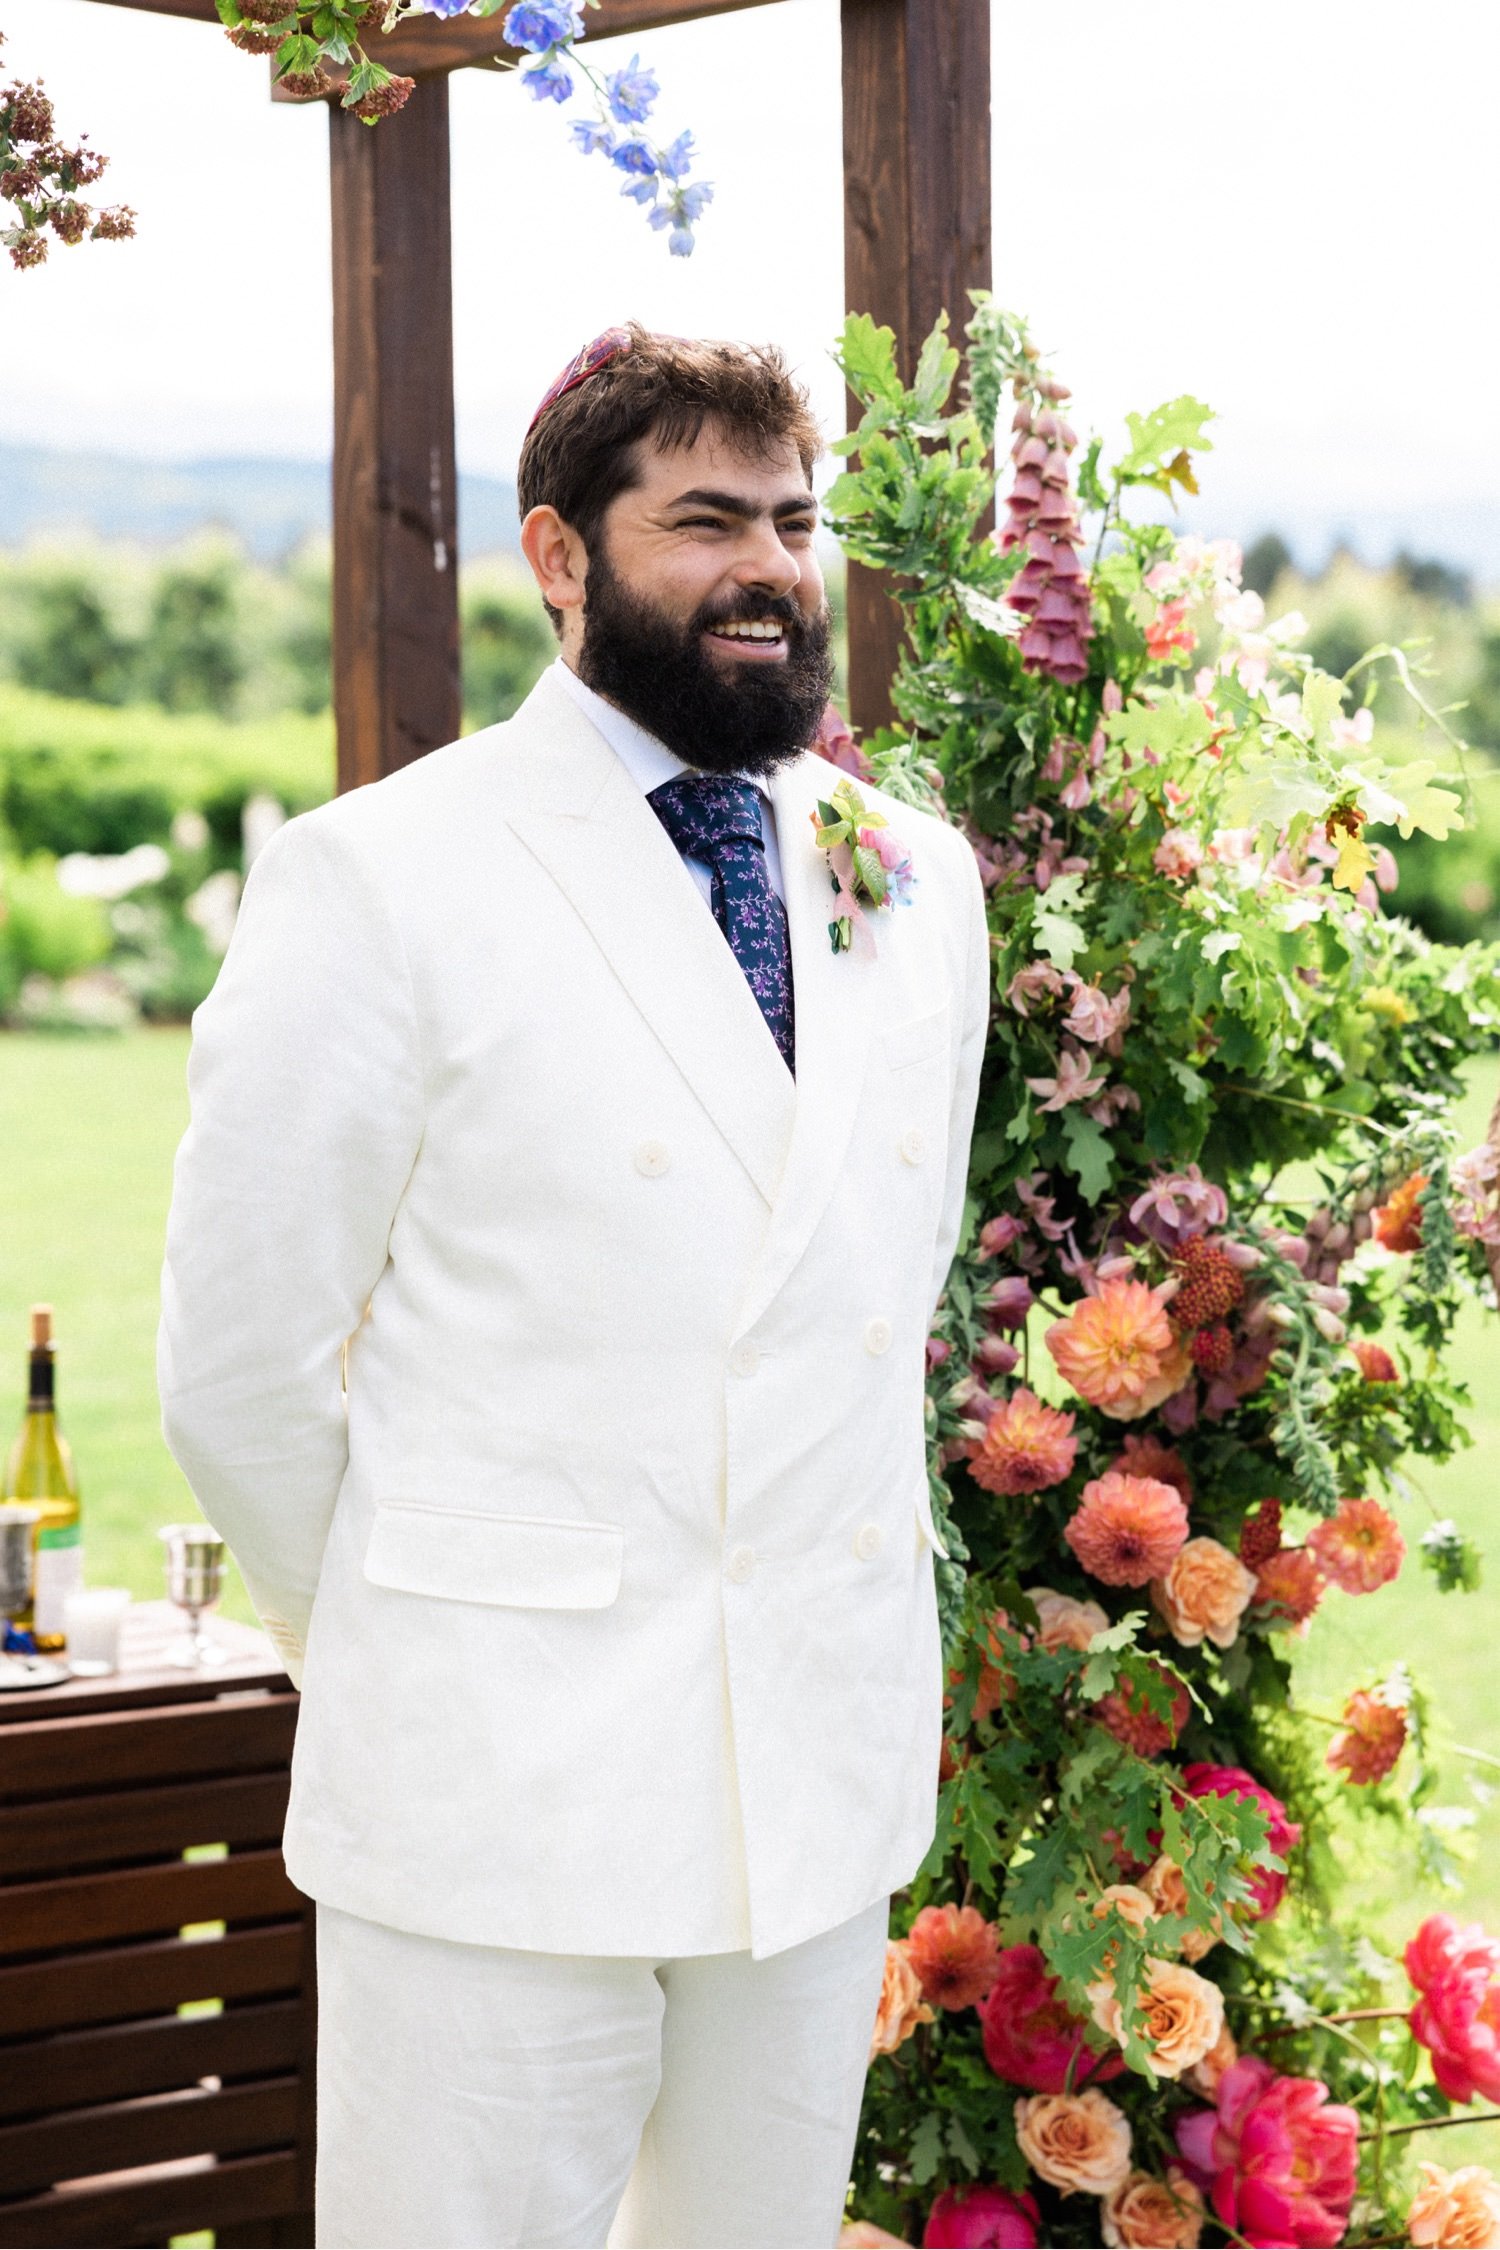 038_The Orchard Hood River Wedding83_groom wearing white suit and kippah sands under floral arbor and smiles.jpg